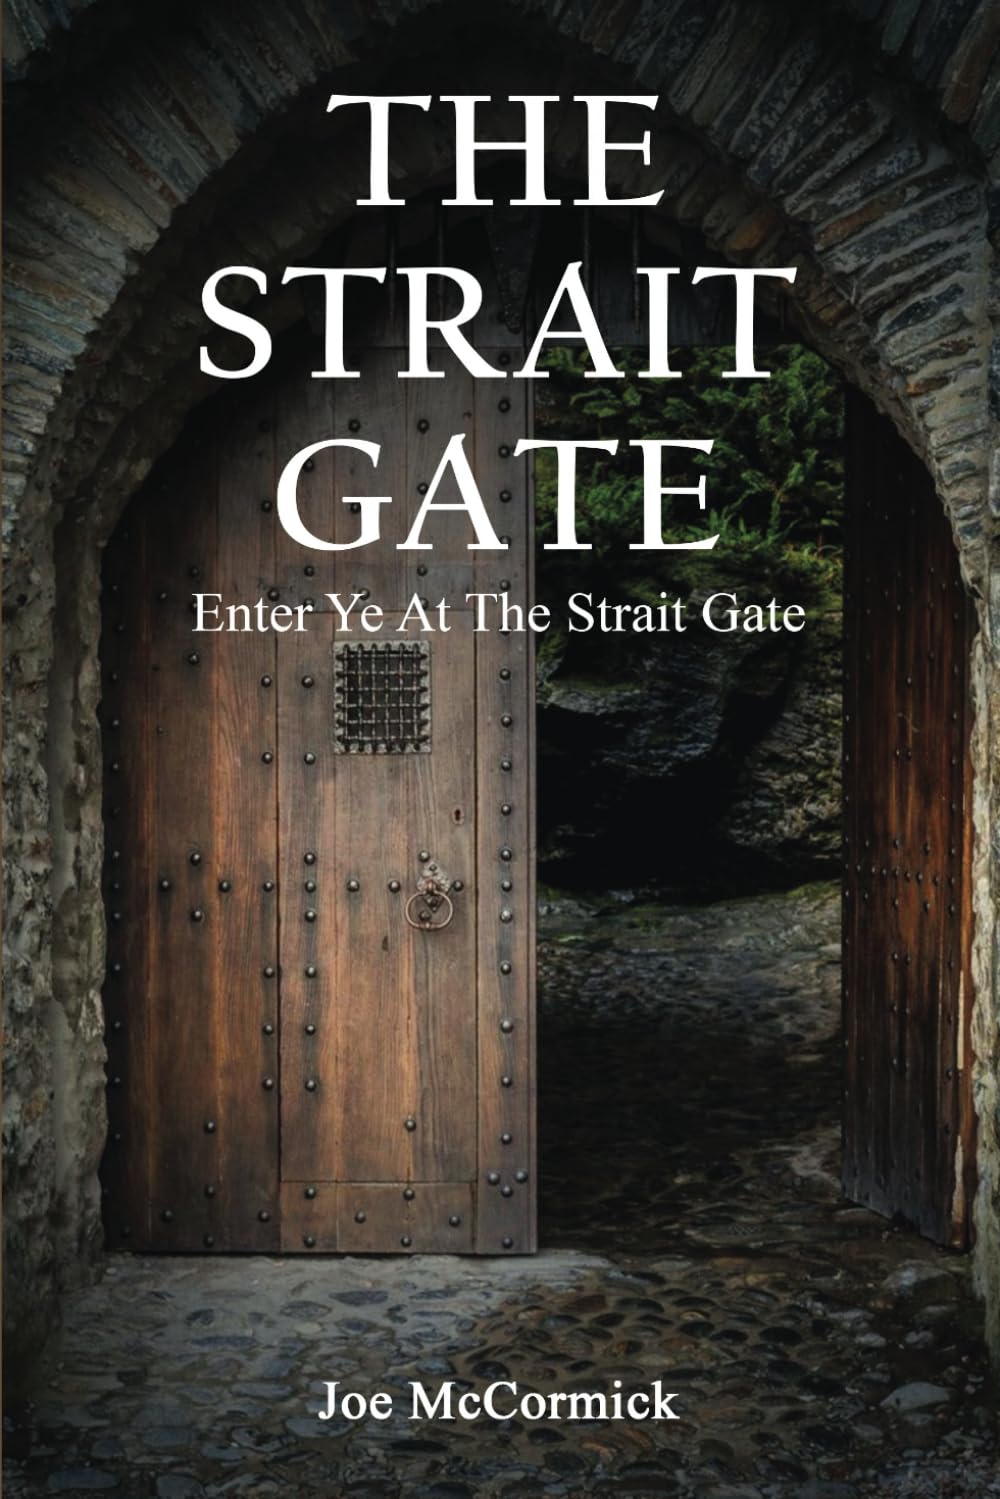 Transformative Spiritual Journey Unveiled in "The Strait Gate" by Joe McCormick